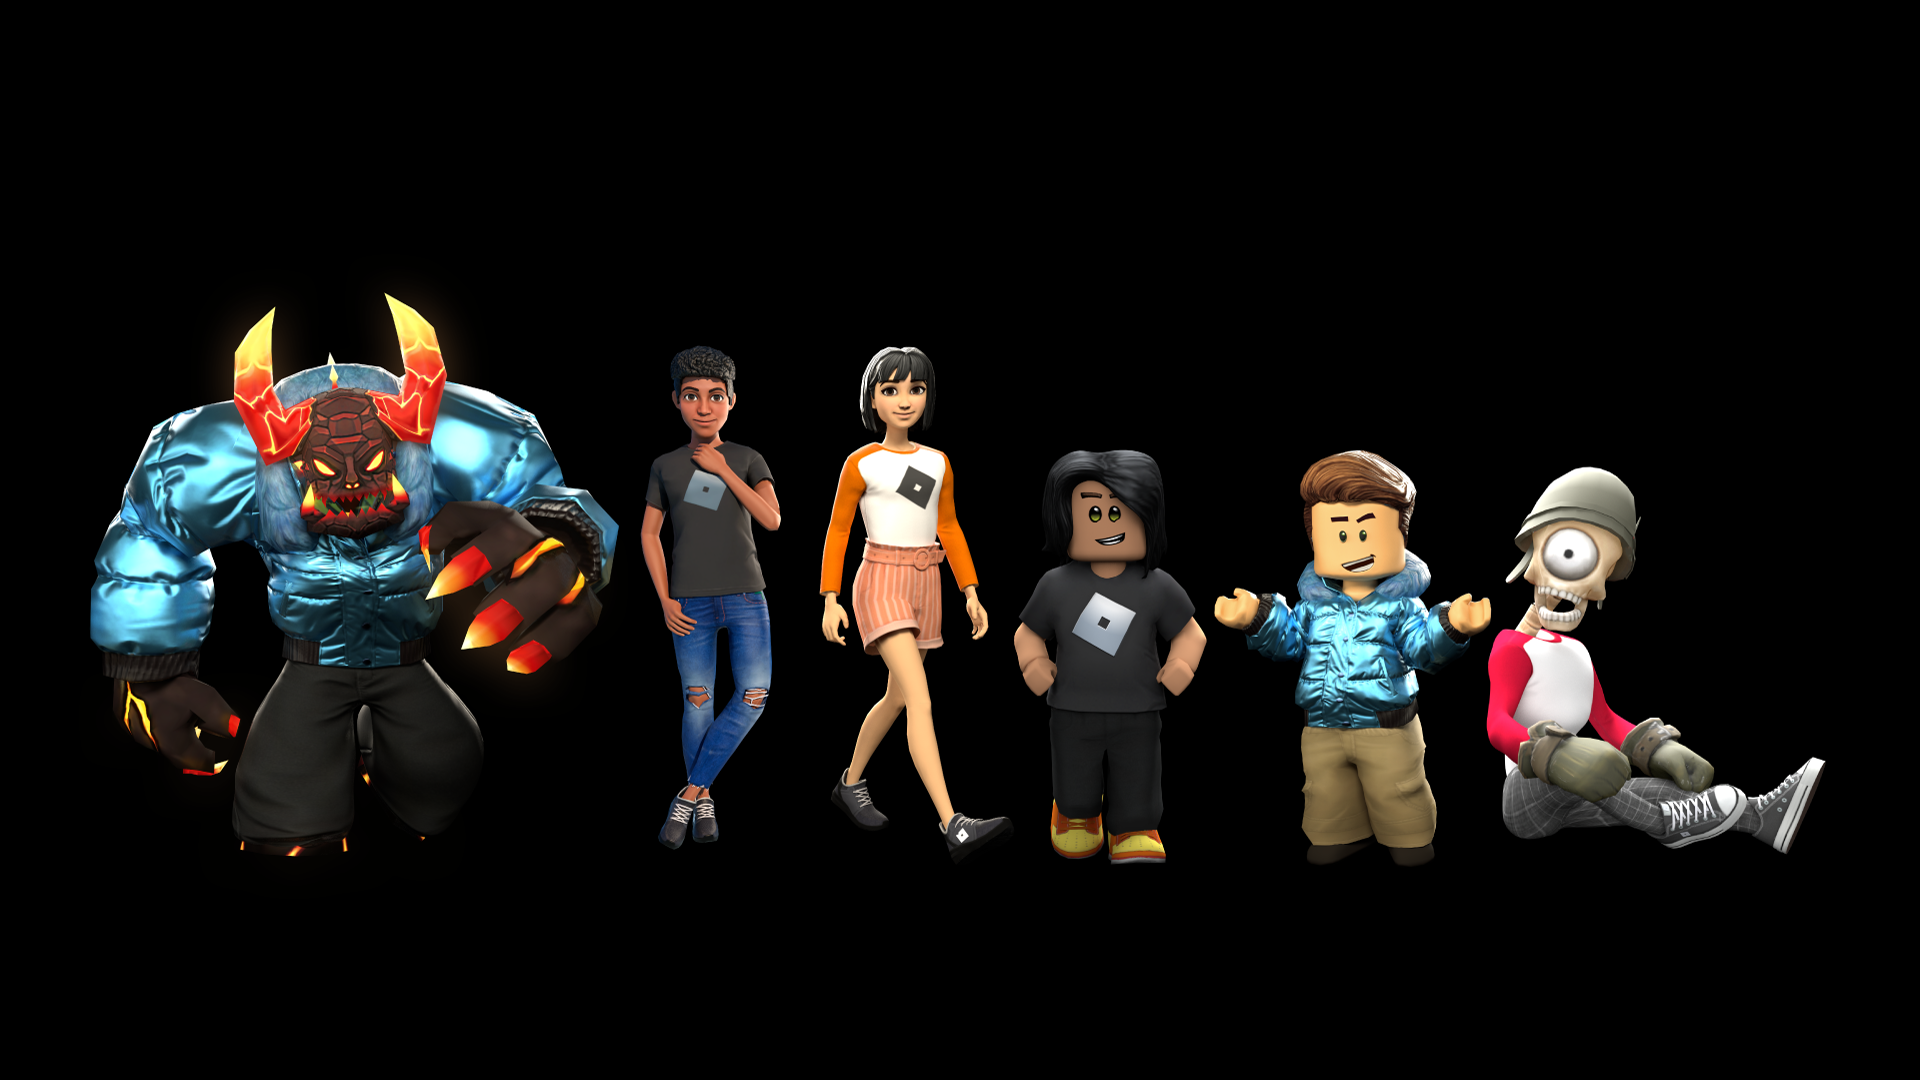 Layers of Genius Behind Layered Clothing - Roblox Blog